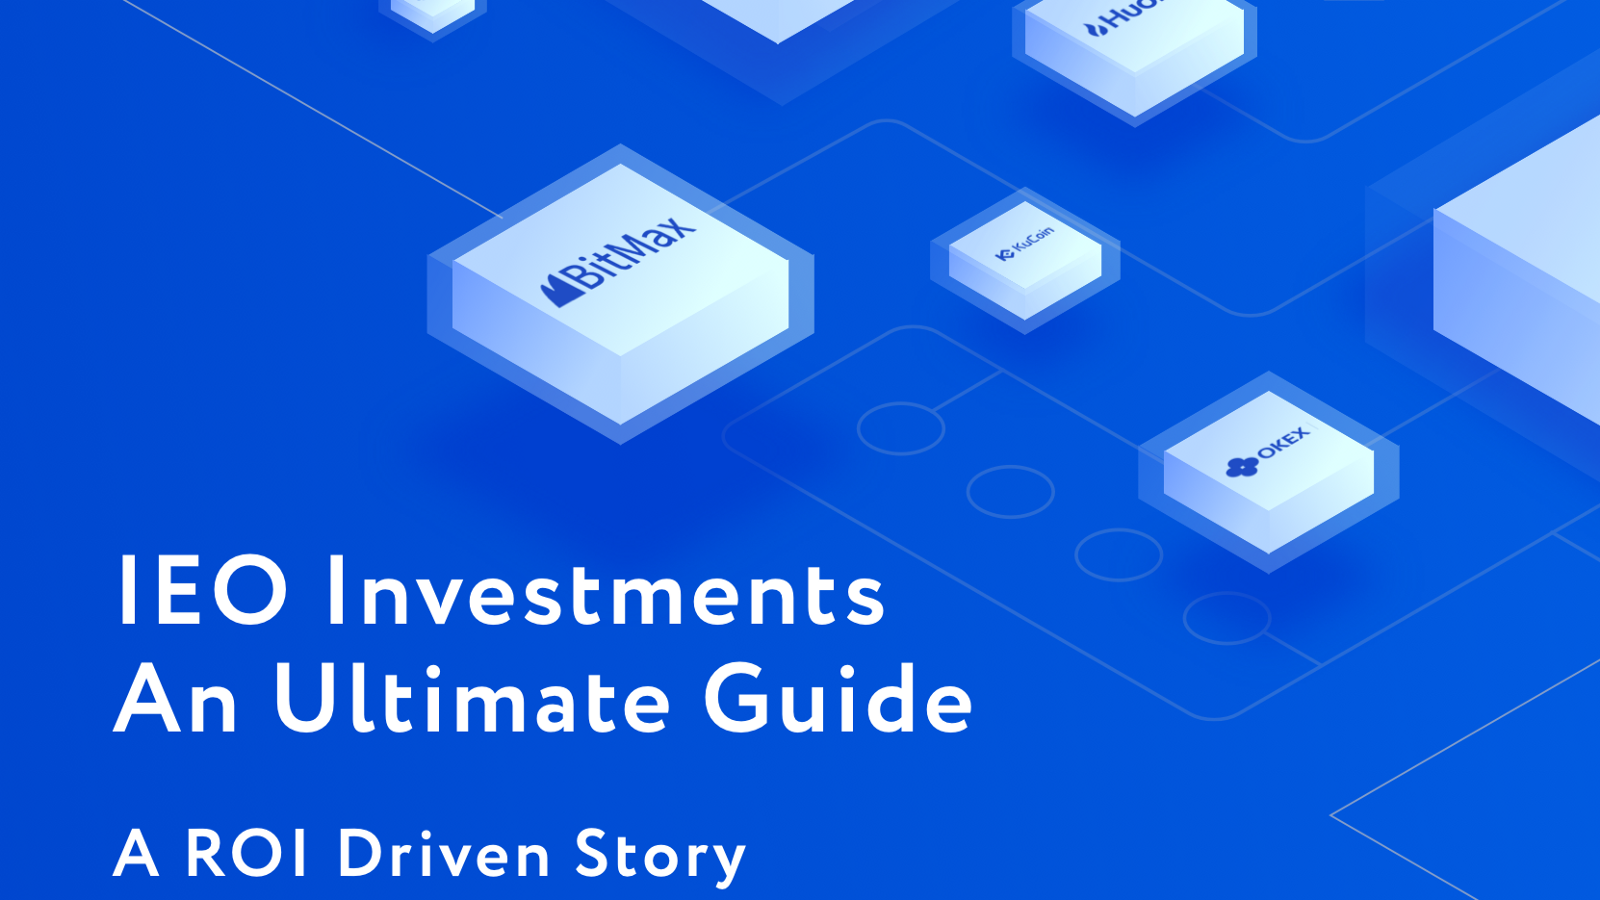 IEO Investments: An Ultimate Guide. Dynamics and Trends